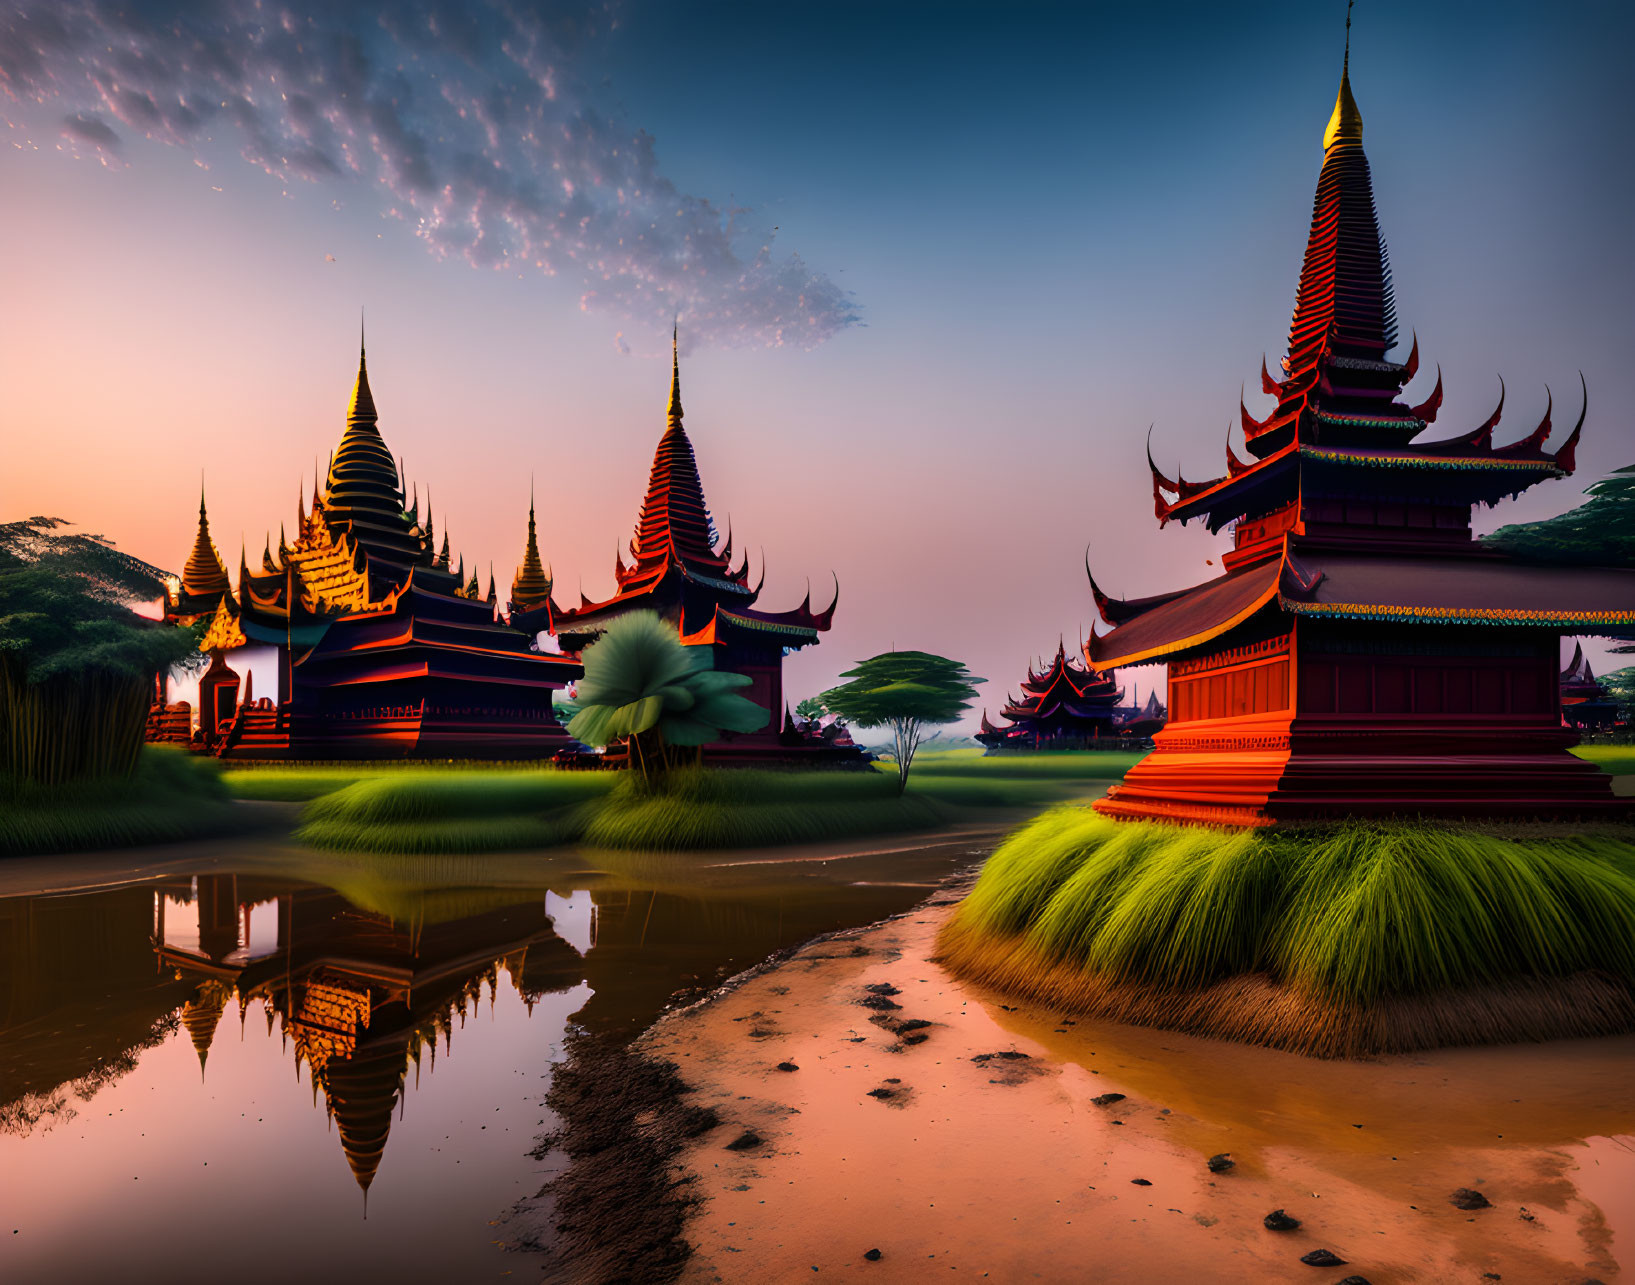 Thai-style Buildings Reflected in Water at Sunset